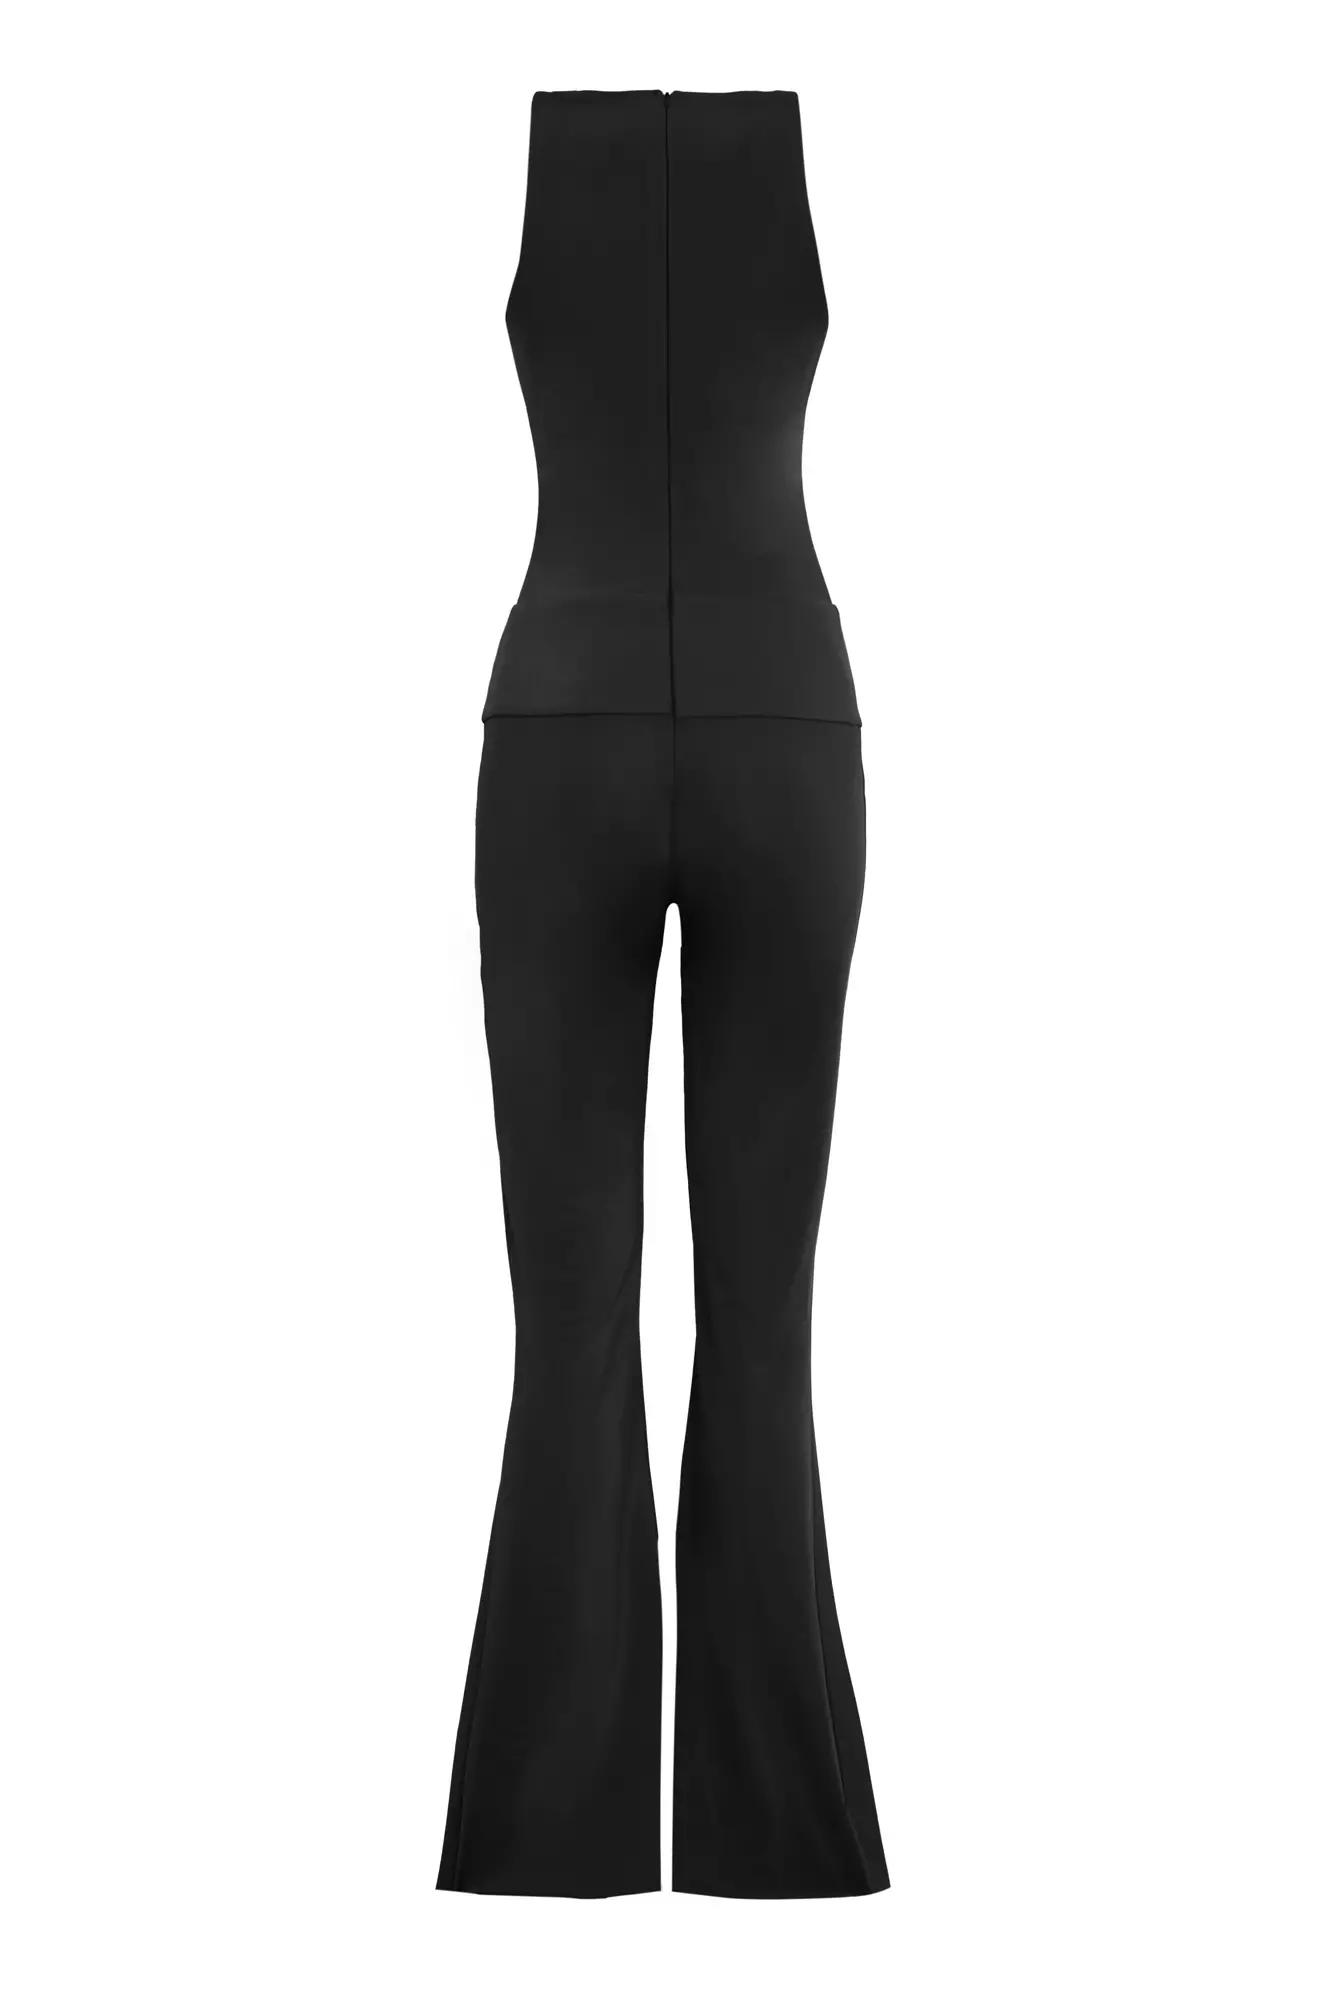 Black knitted sleeveless long suit